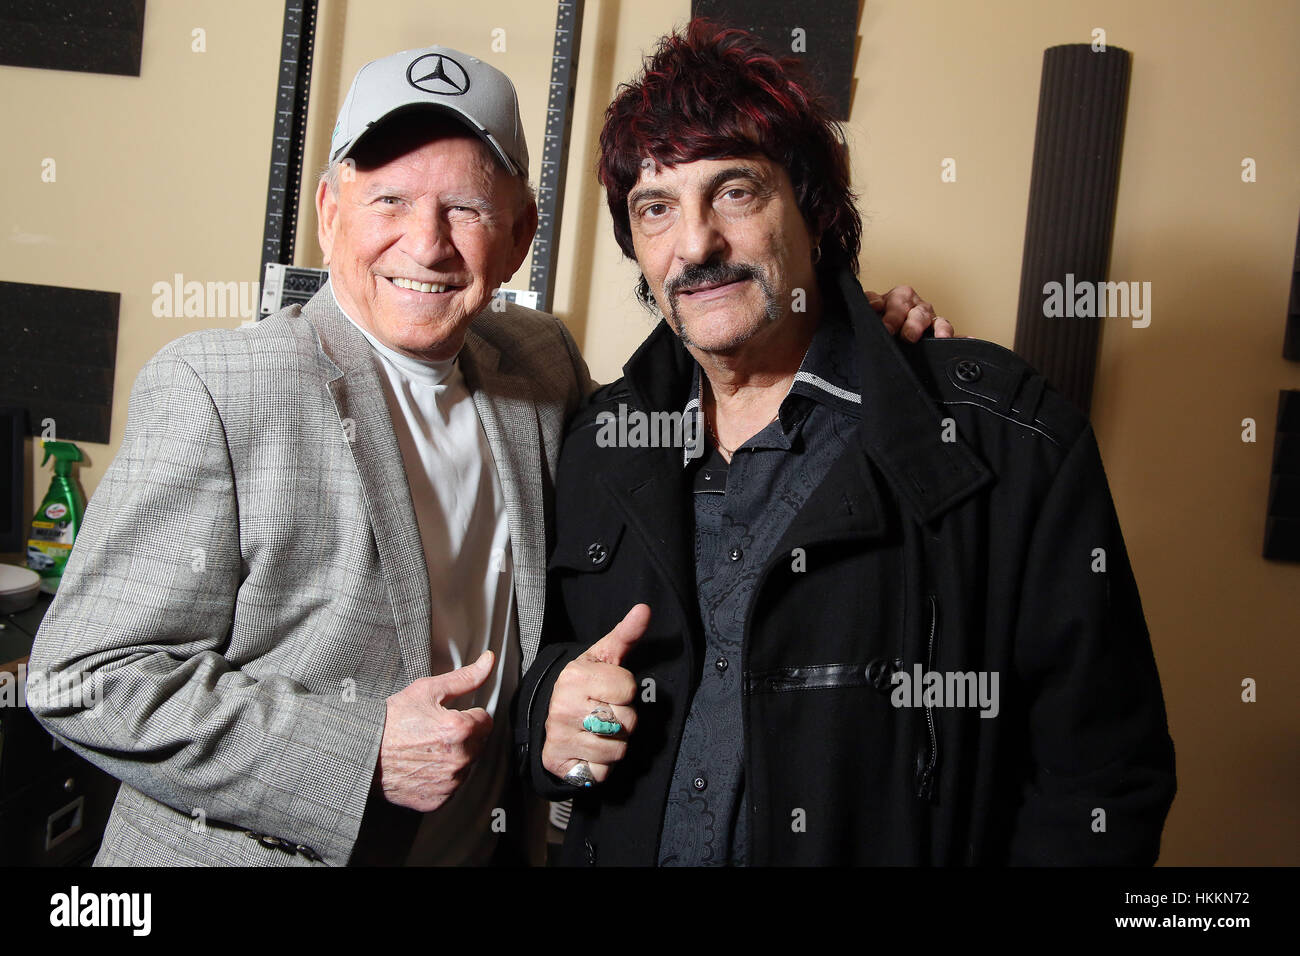 Berlin, USA. 26th Jan, 2017. Carmine Appice holds a master drumming class moderated by Bobby Rydell at The Vault at Victor Records in Berlin, New Jersey. Credit: Star Shooter/Media Punch/Alamy Live News Stock Photo